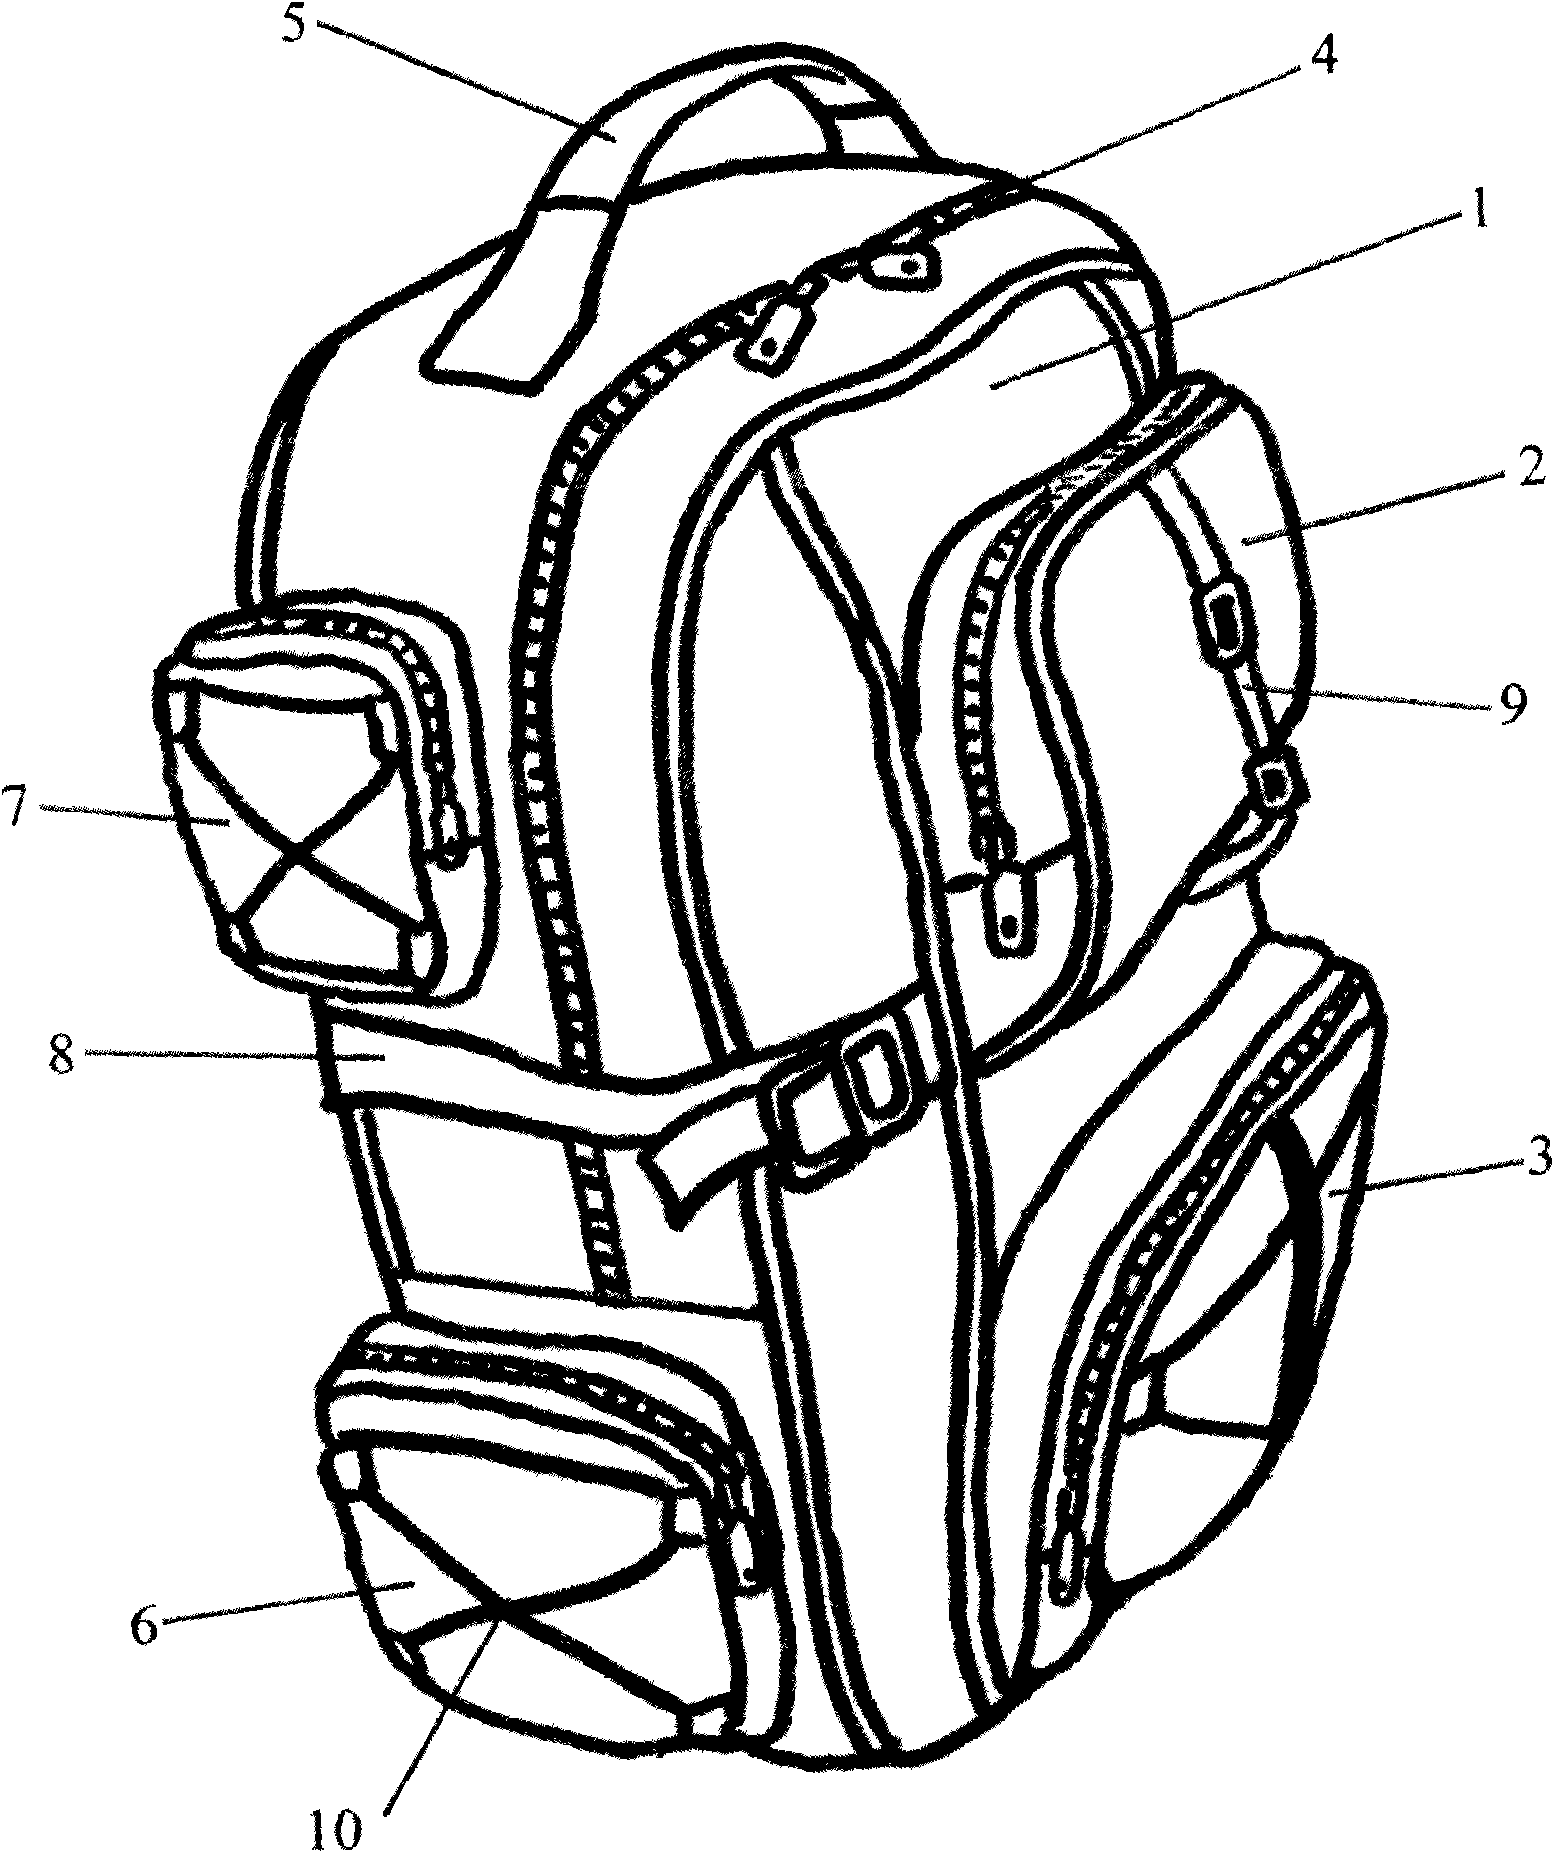 Backpack with reticulate pattern strips and six pockets